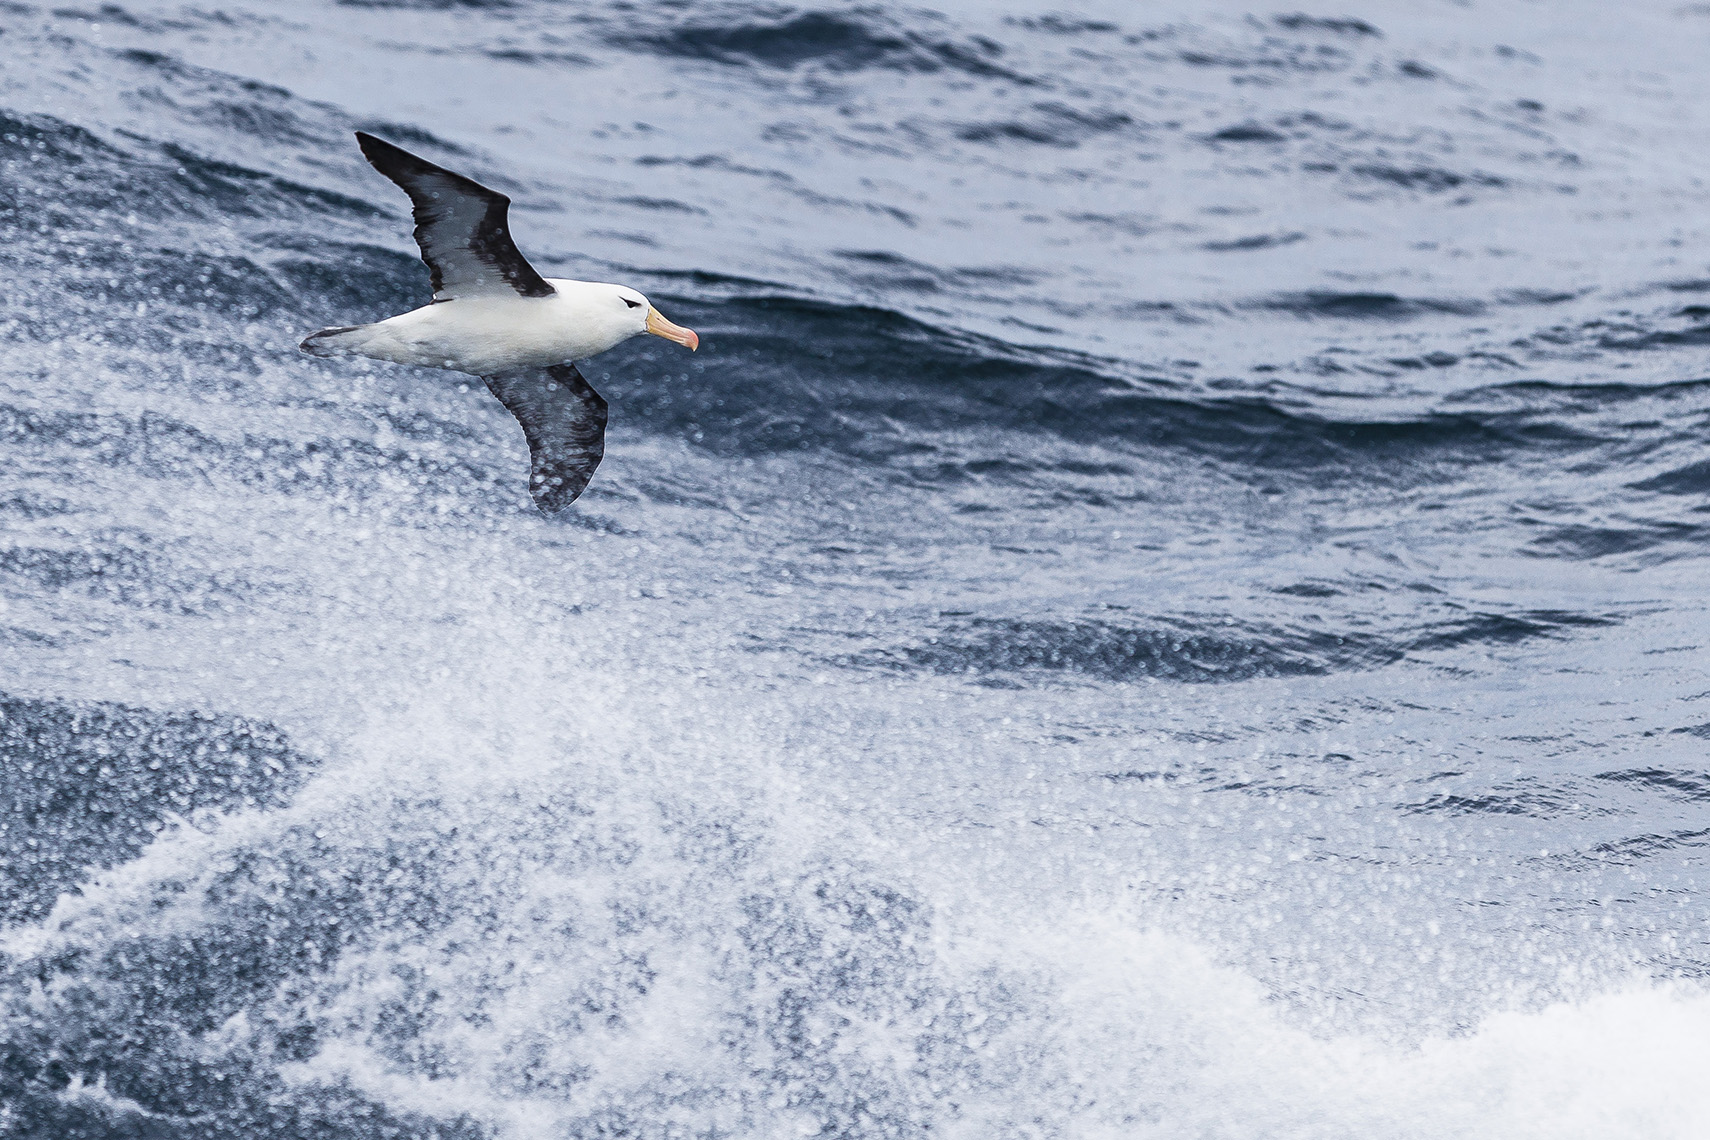 Bird-watching is one of the many on-ship activities guests enjoy while on the Drake Passage crossing.